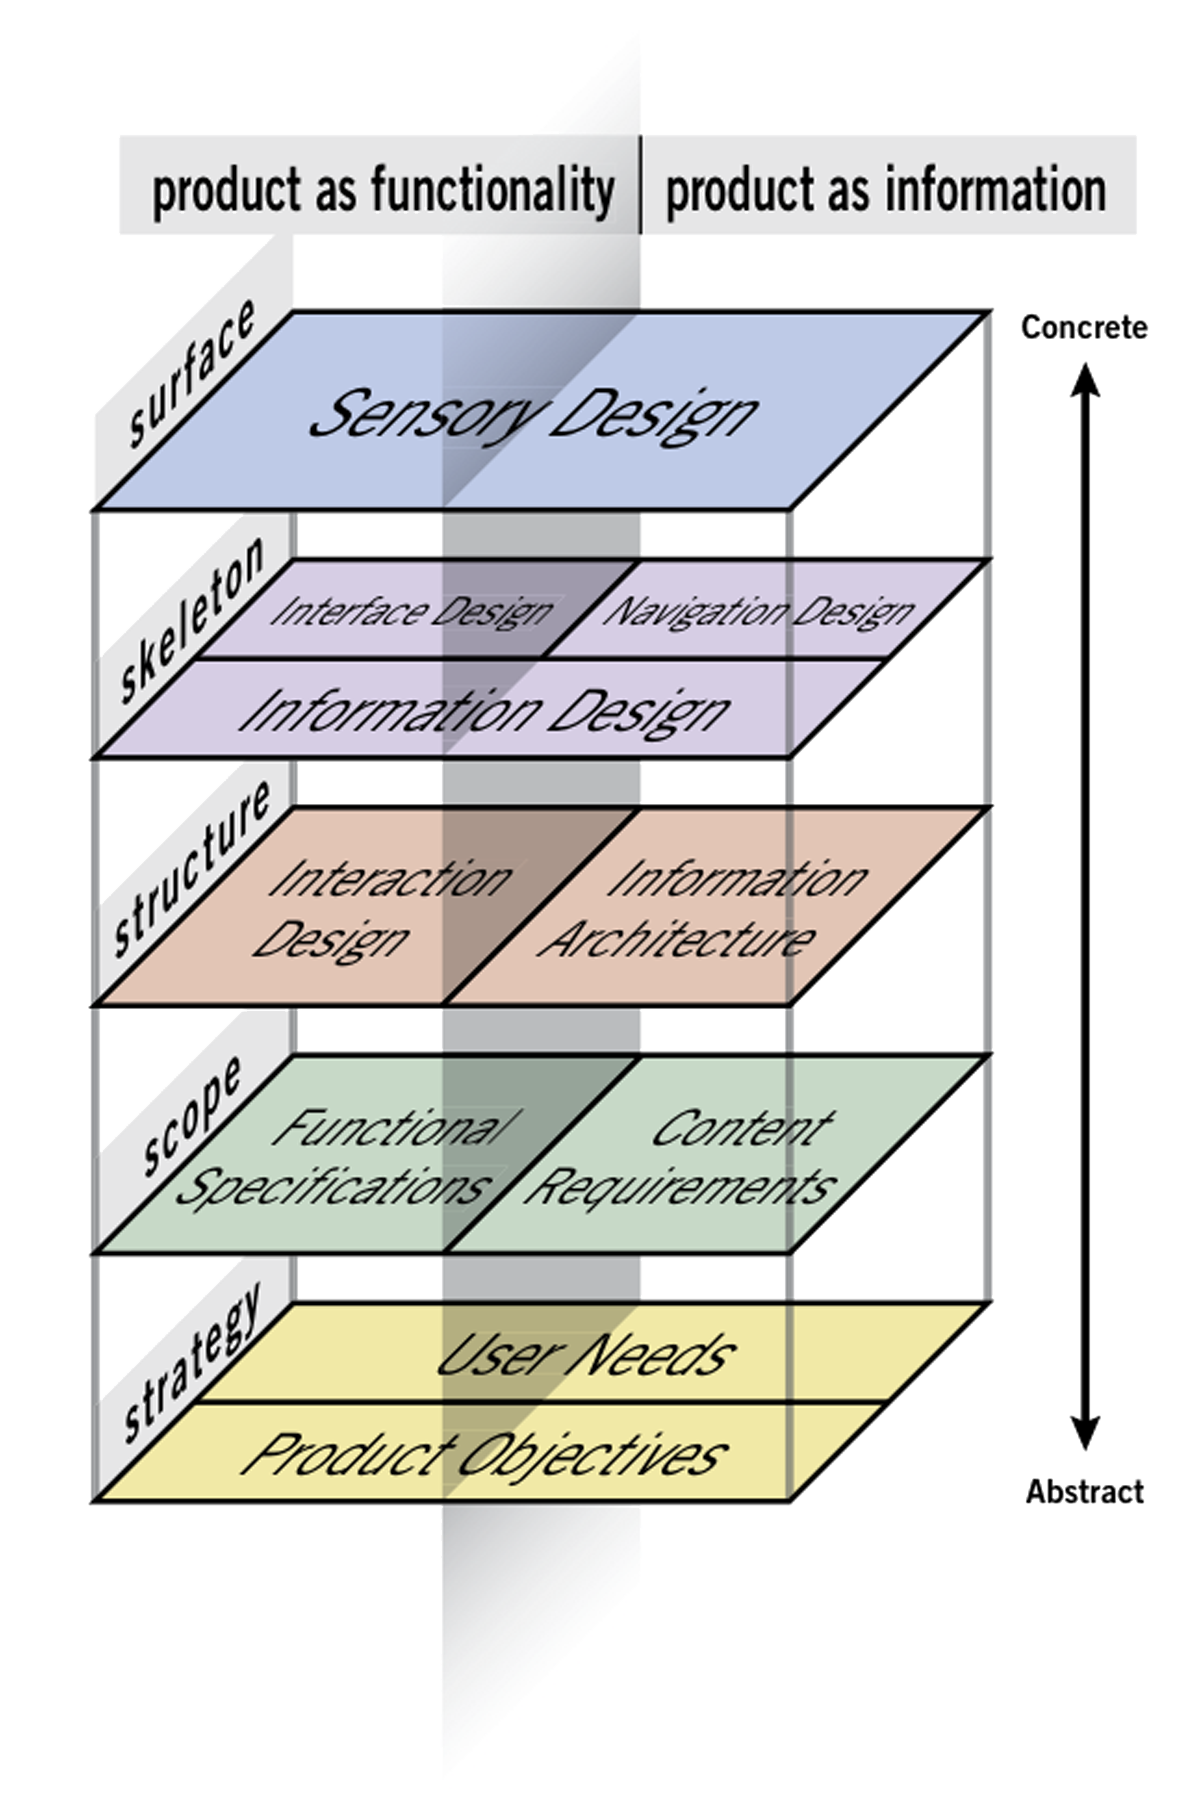 Diagram showing the various layers that make up a user's digital experience.